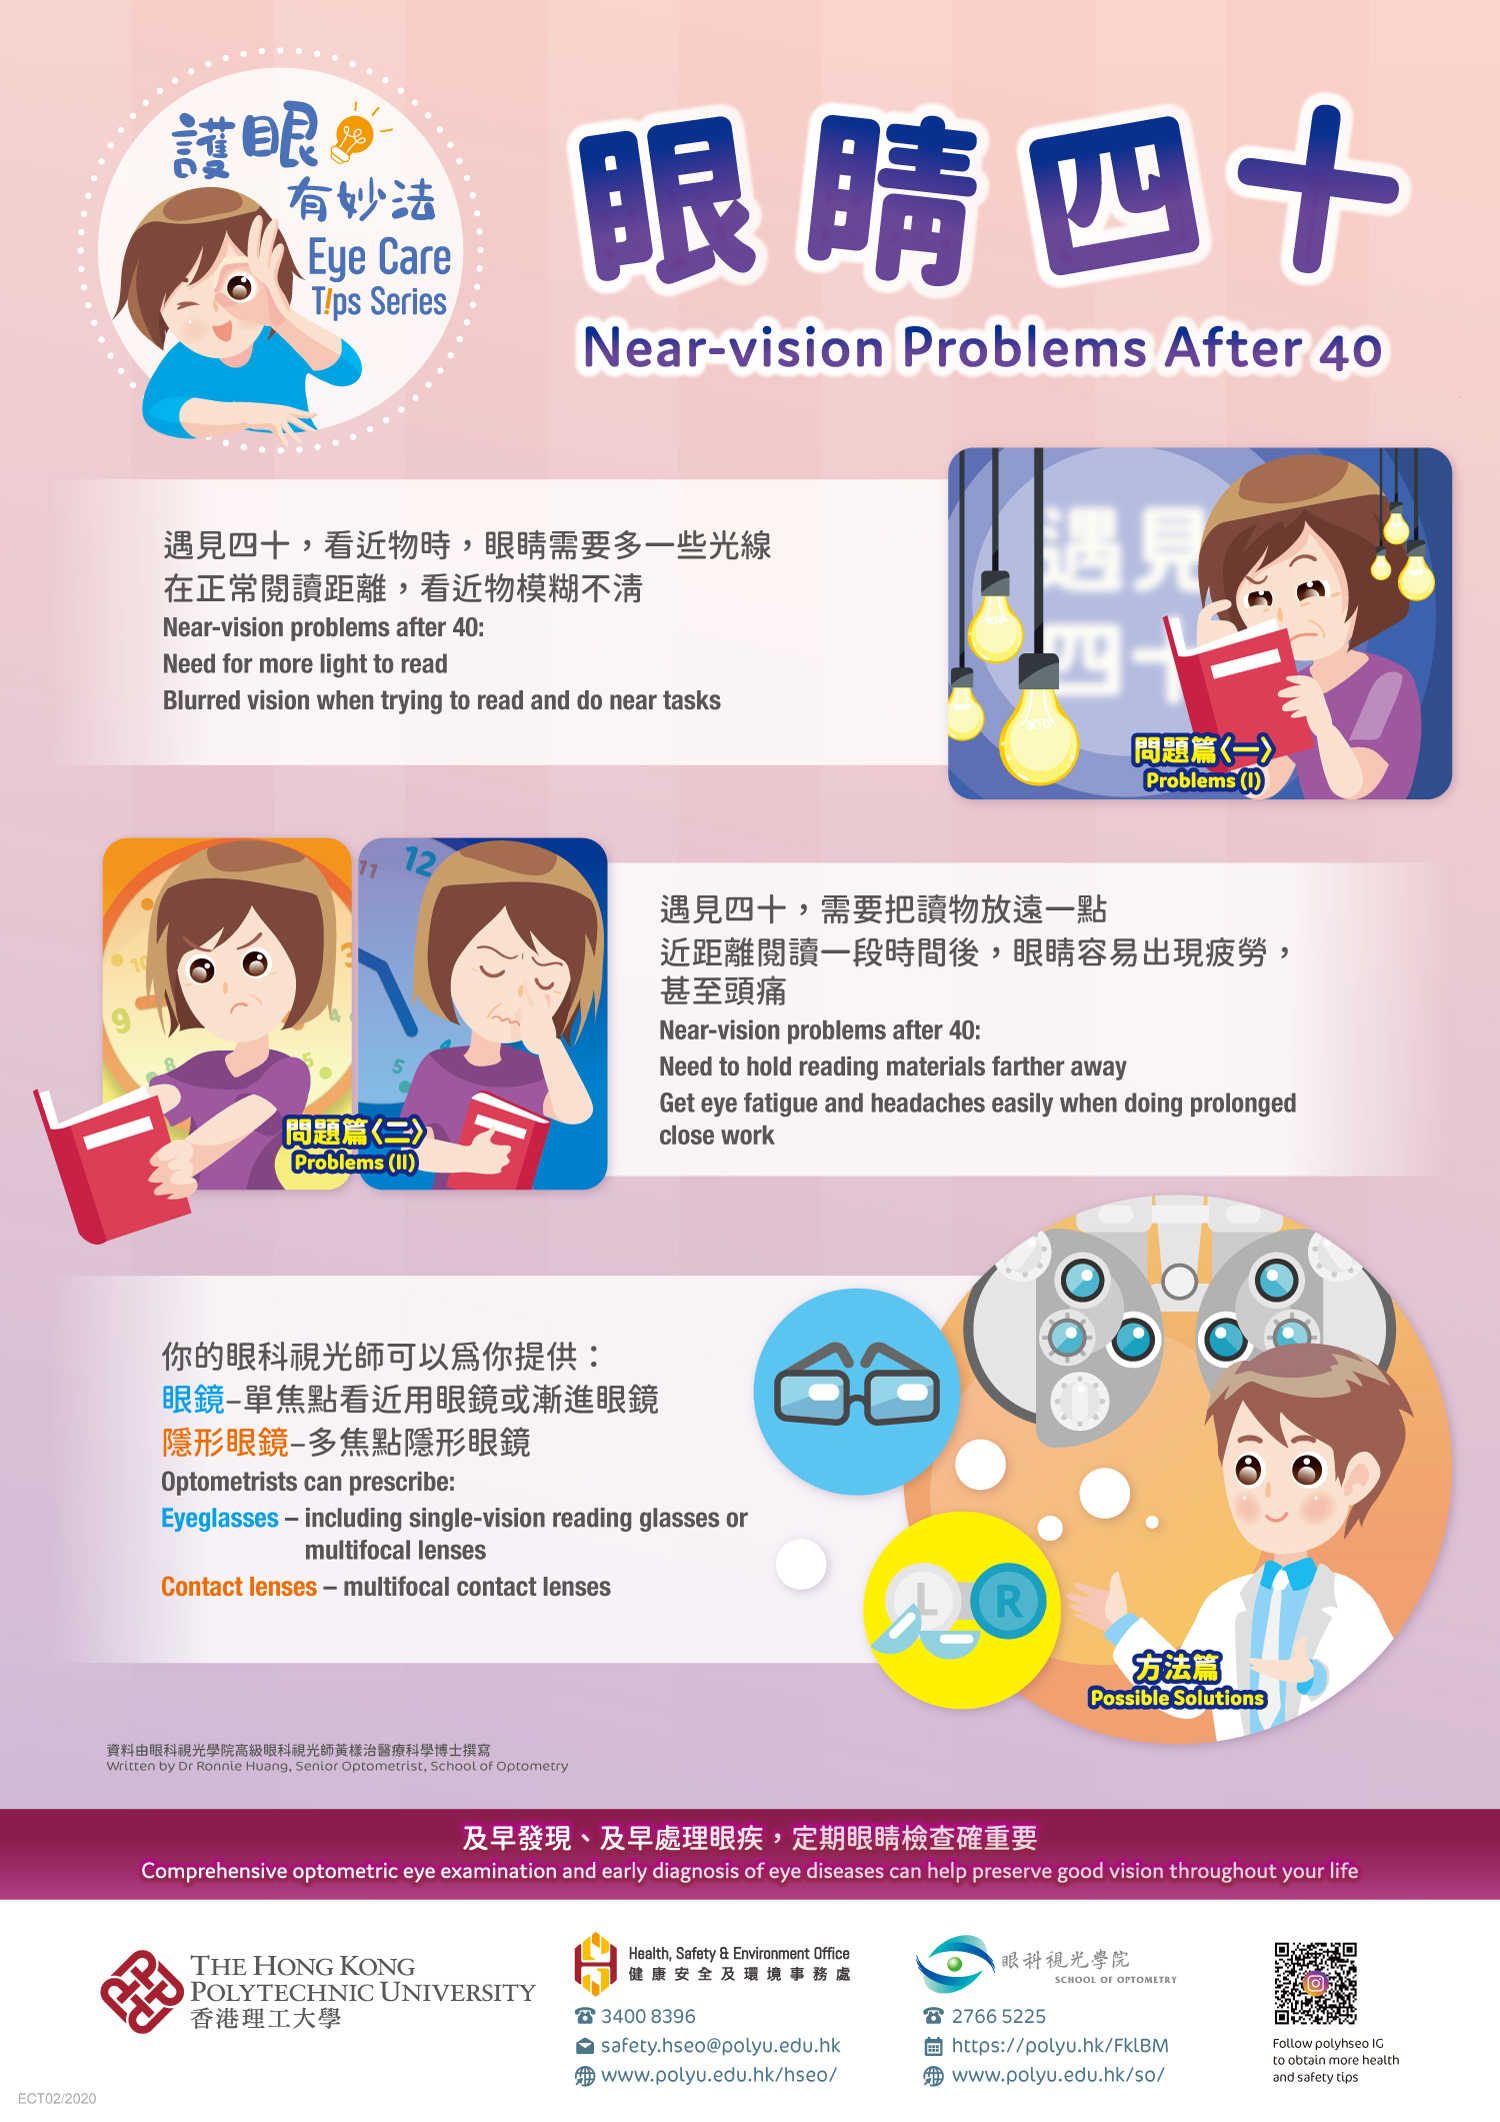 Eye Care Tips Poster 2_Near Vision Problems